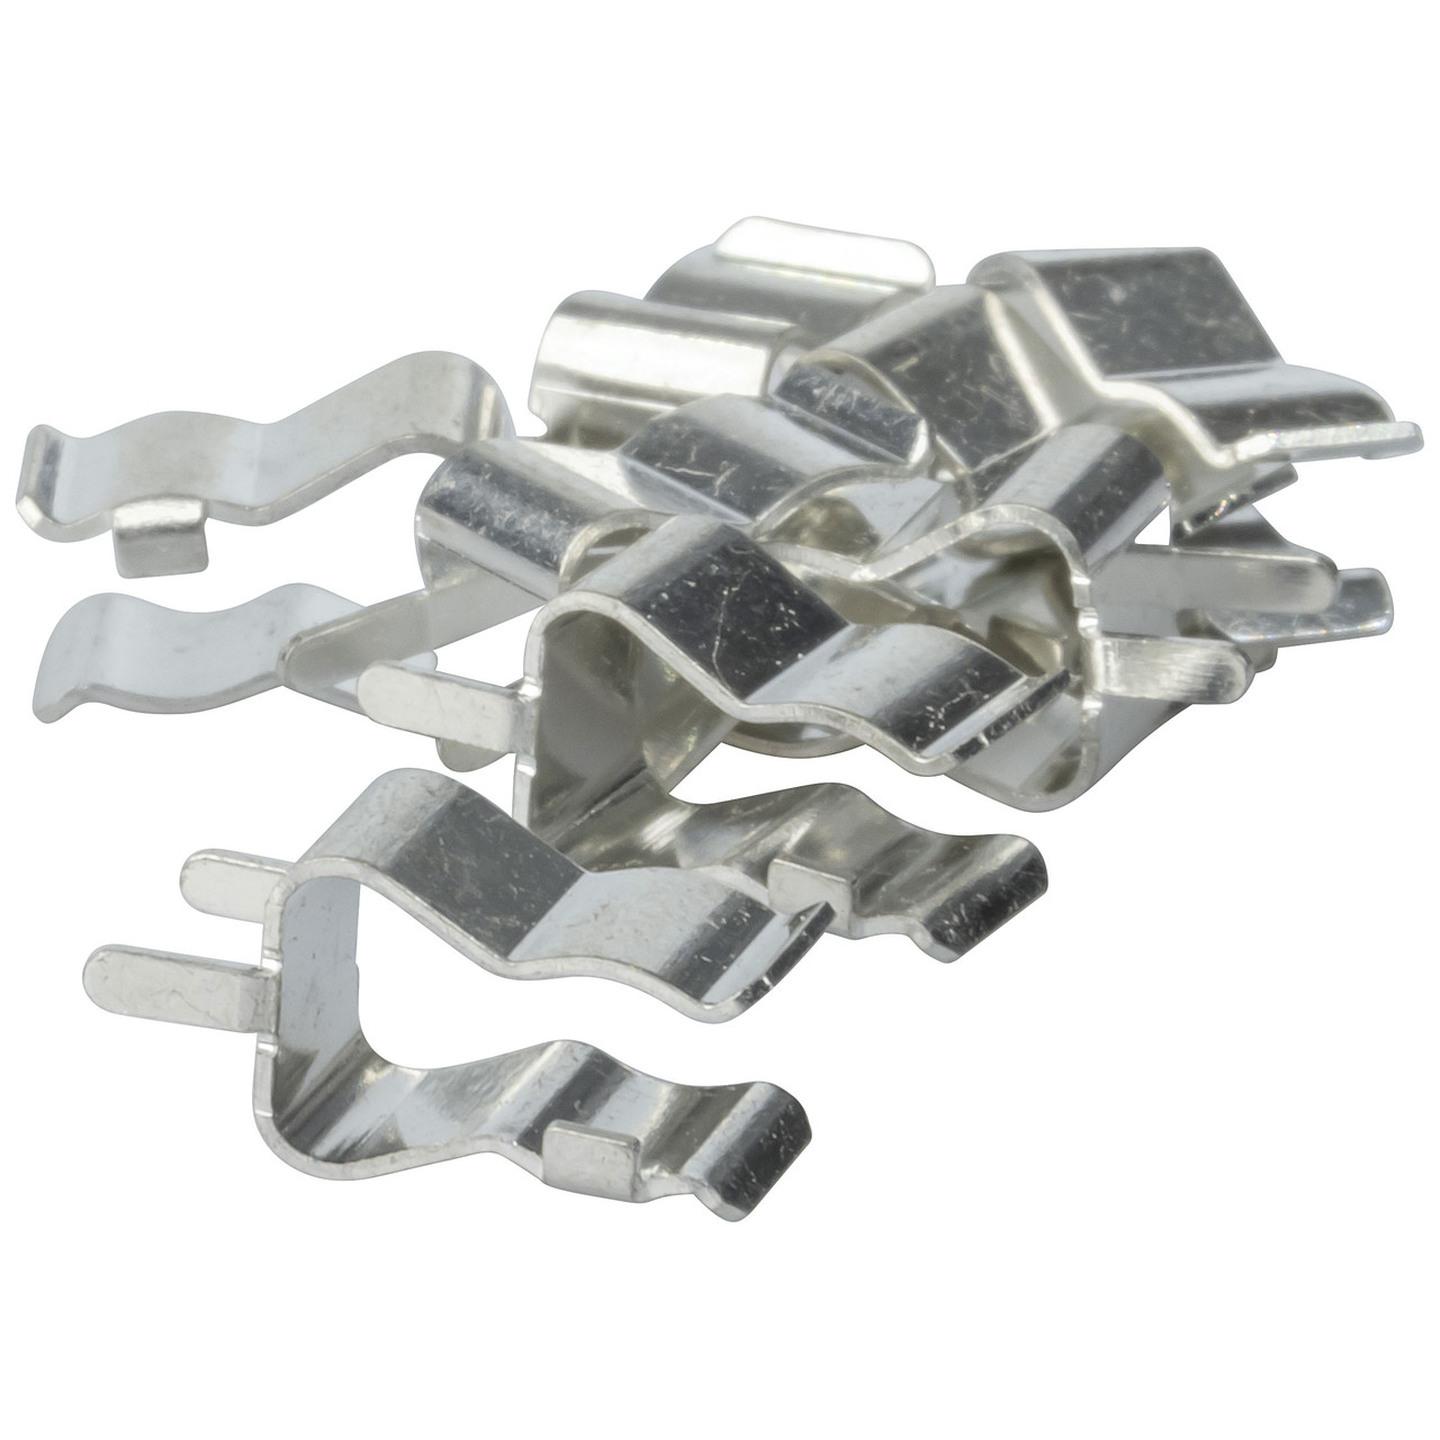 M205 Fuseclips 8 Pack